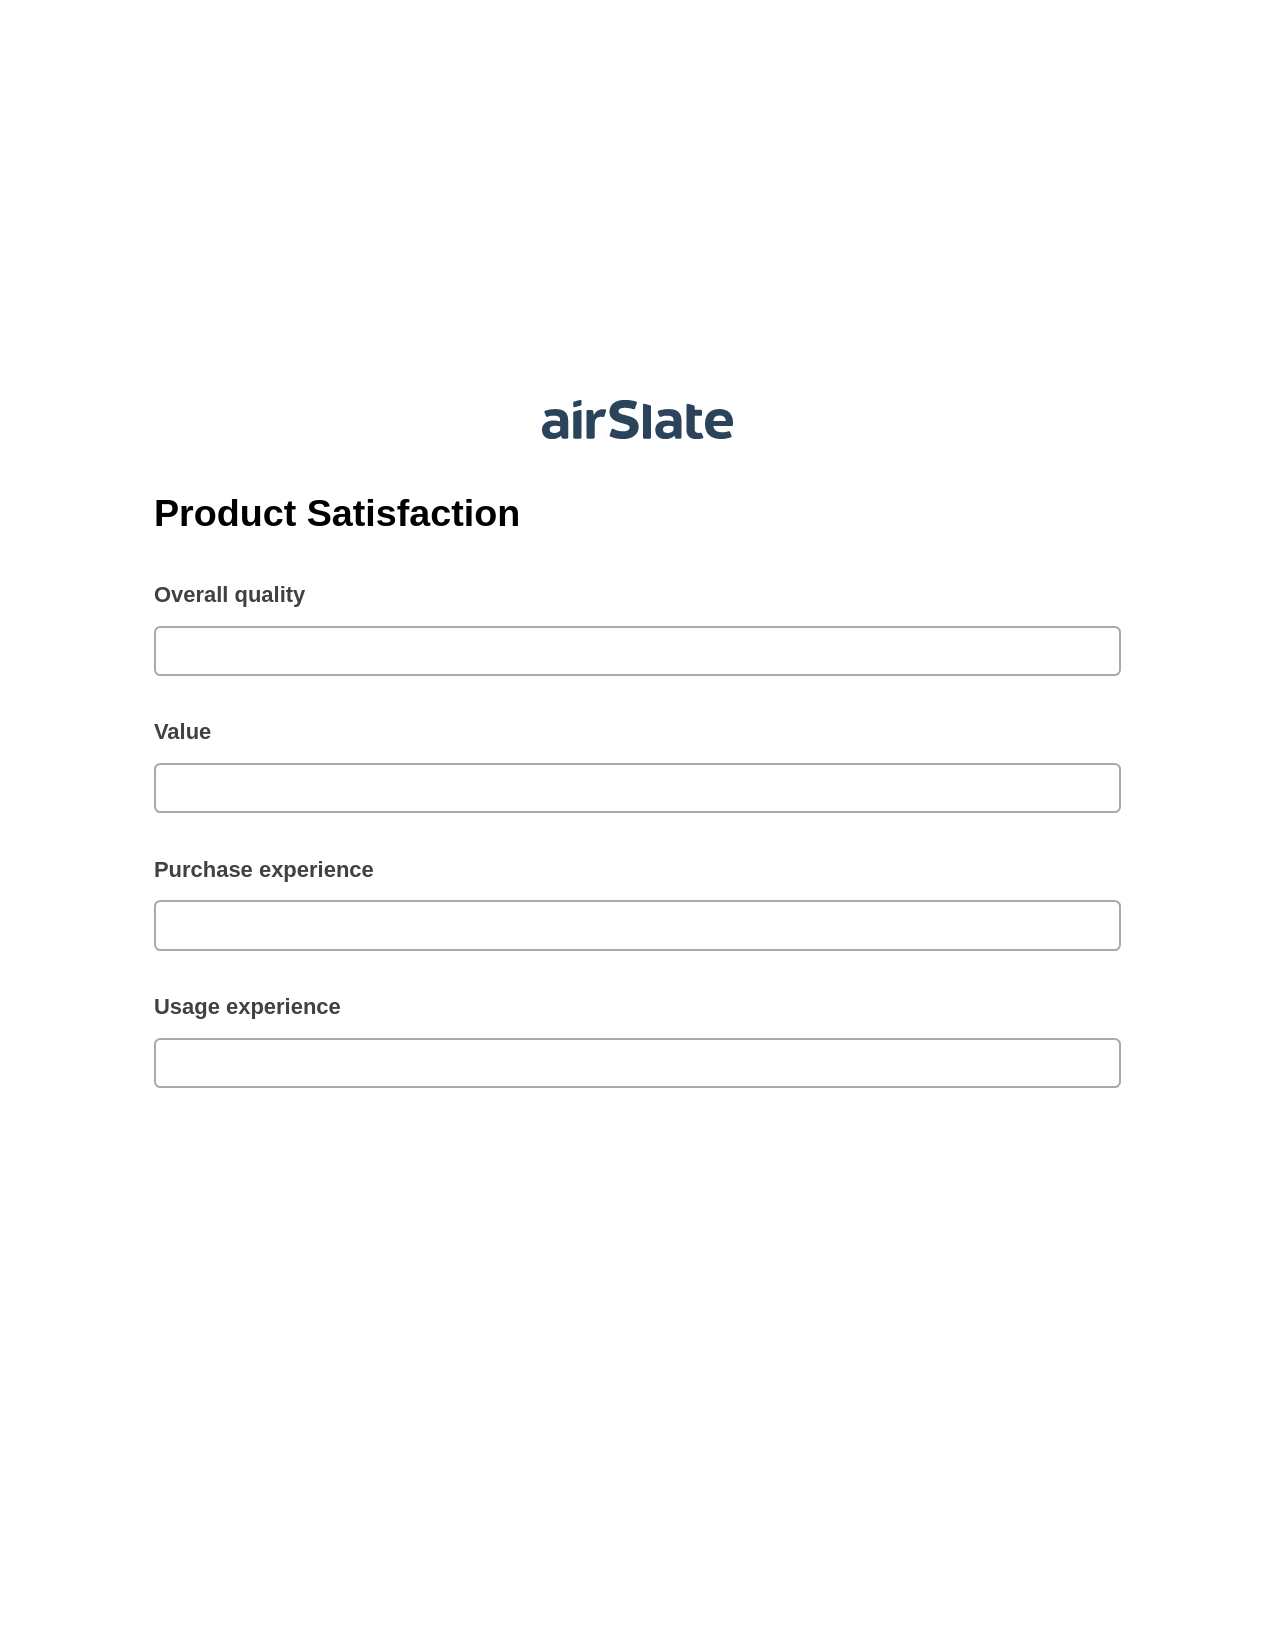 Multirole Product Satisfaction Pre-fill from CSV File Bot, Assign Slate Name Bot, Export to MySQL Bot